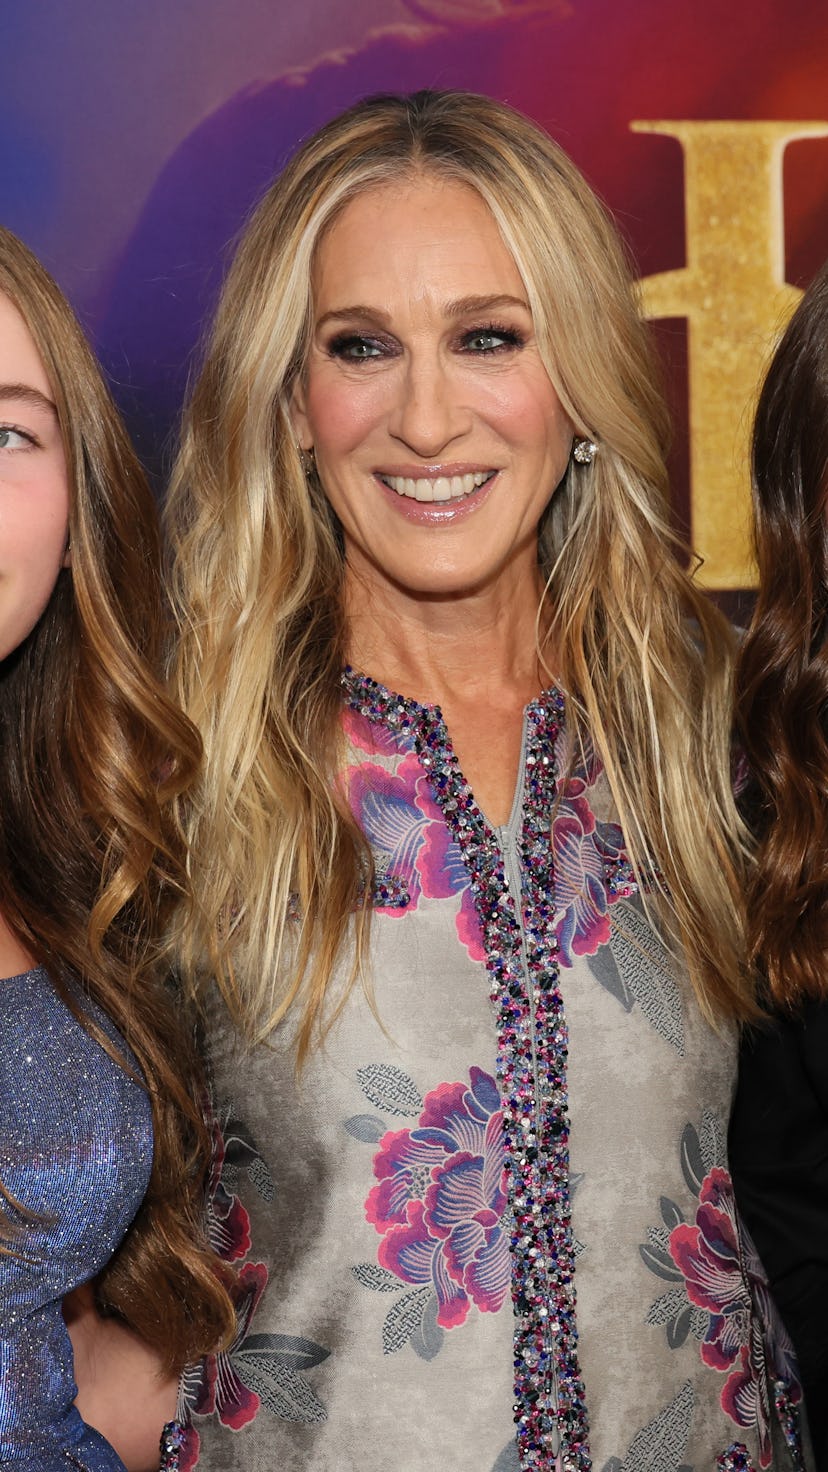 Sarah Jessica Parker attended the 'Hocus Pocus 2' premiere with her two daughters and husband, Matth...